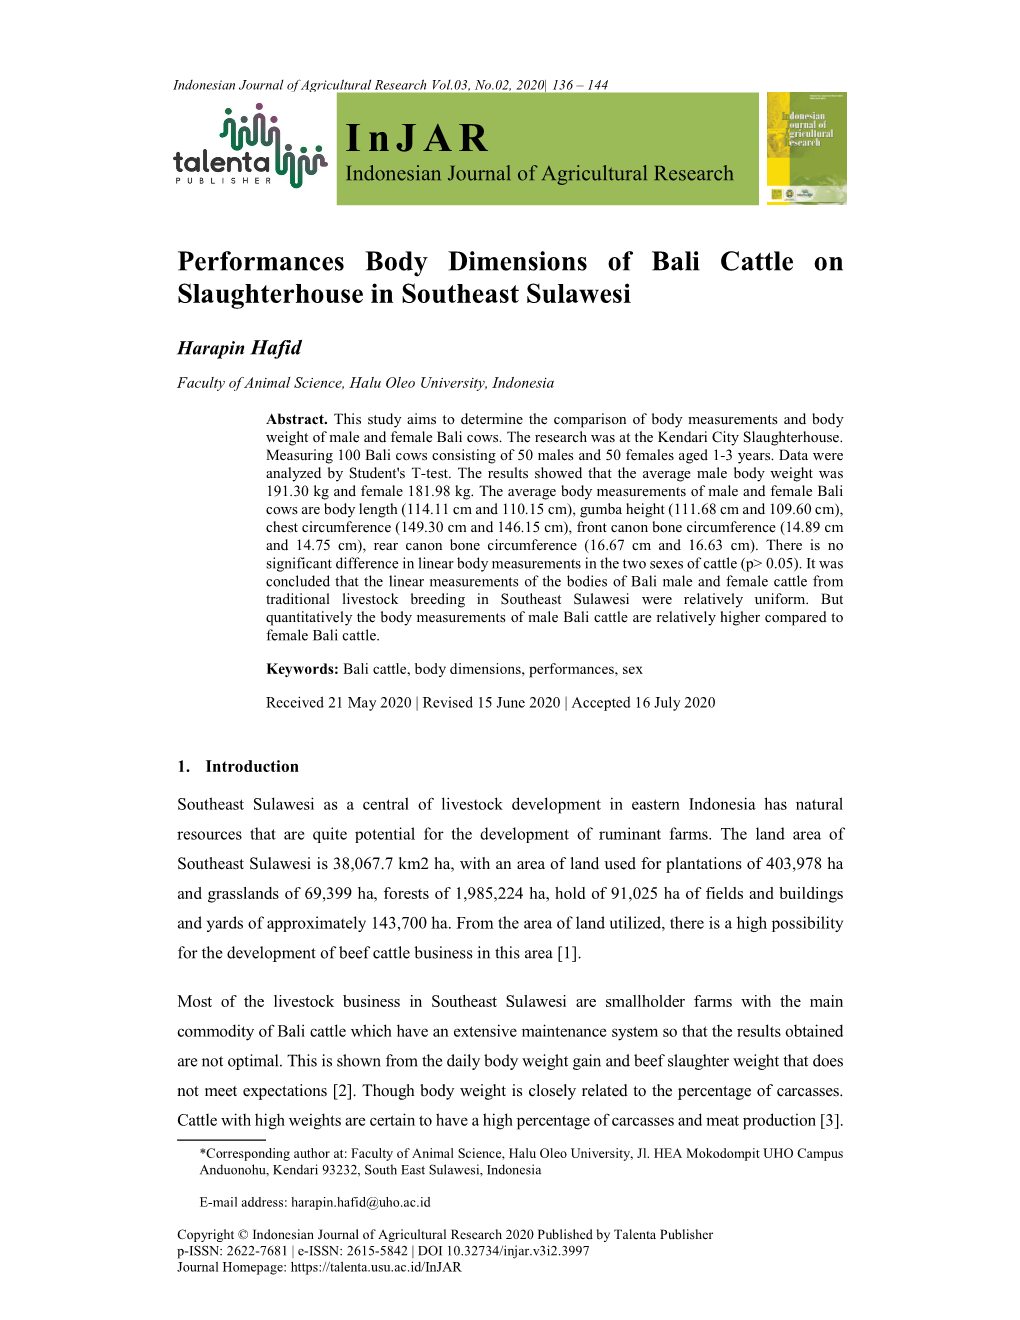 Performances Body Dimensions of Bali Cattle on Slaughterhouse in Southeast Sulawesi